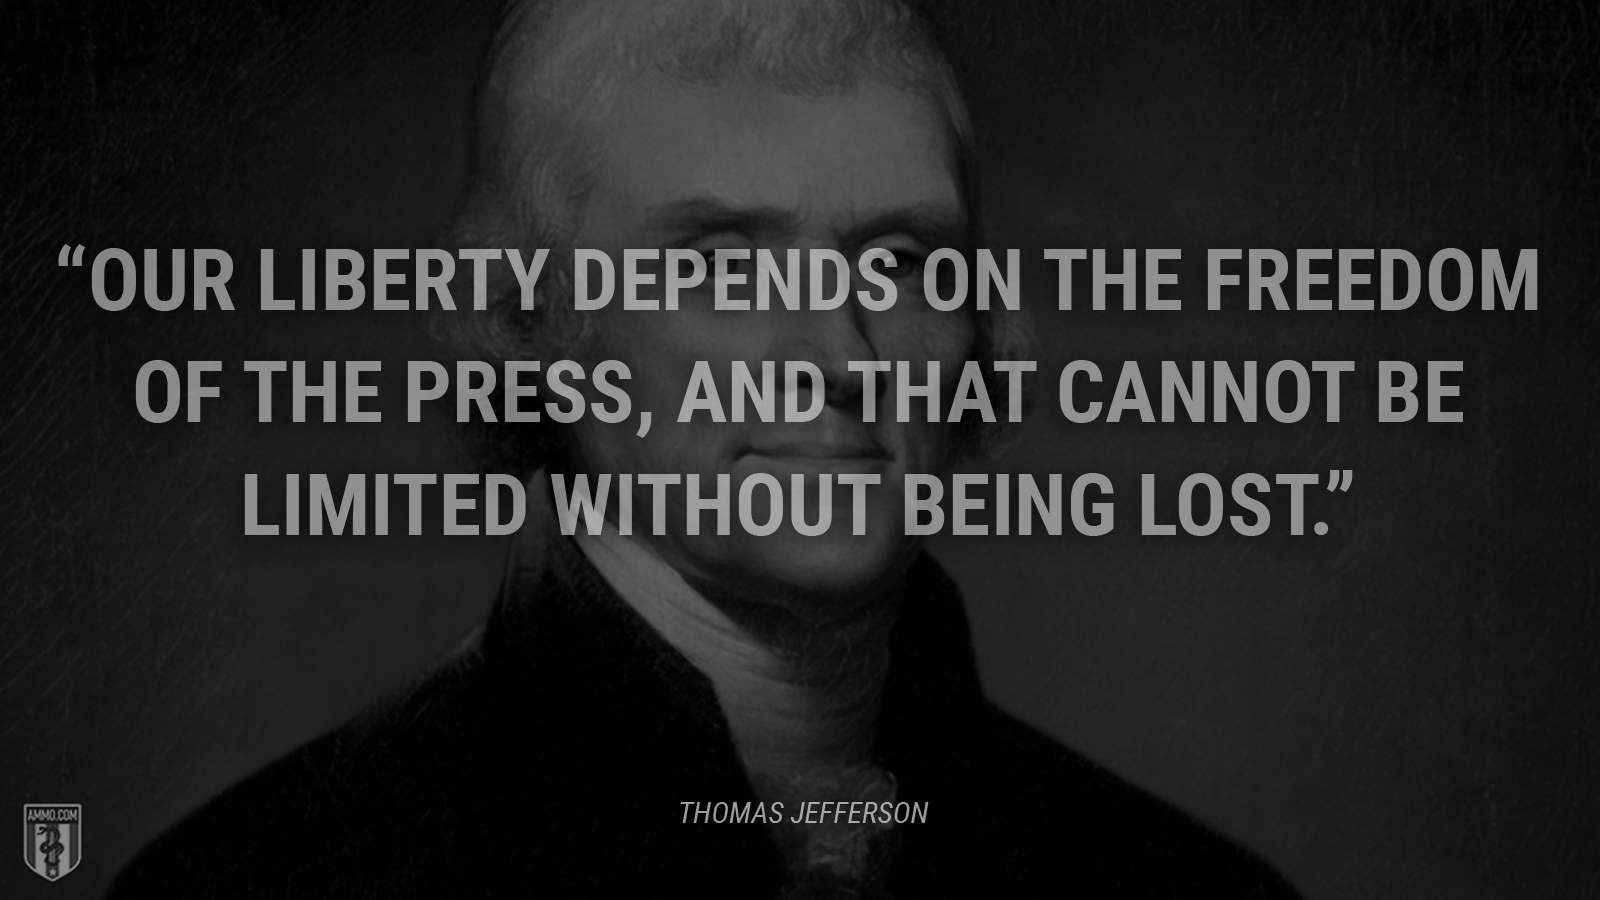 “Our liberty depends on the freedom of the press, and that cannot be limited without being lost.” - Thomas Jefferson